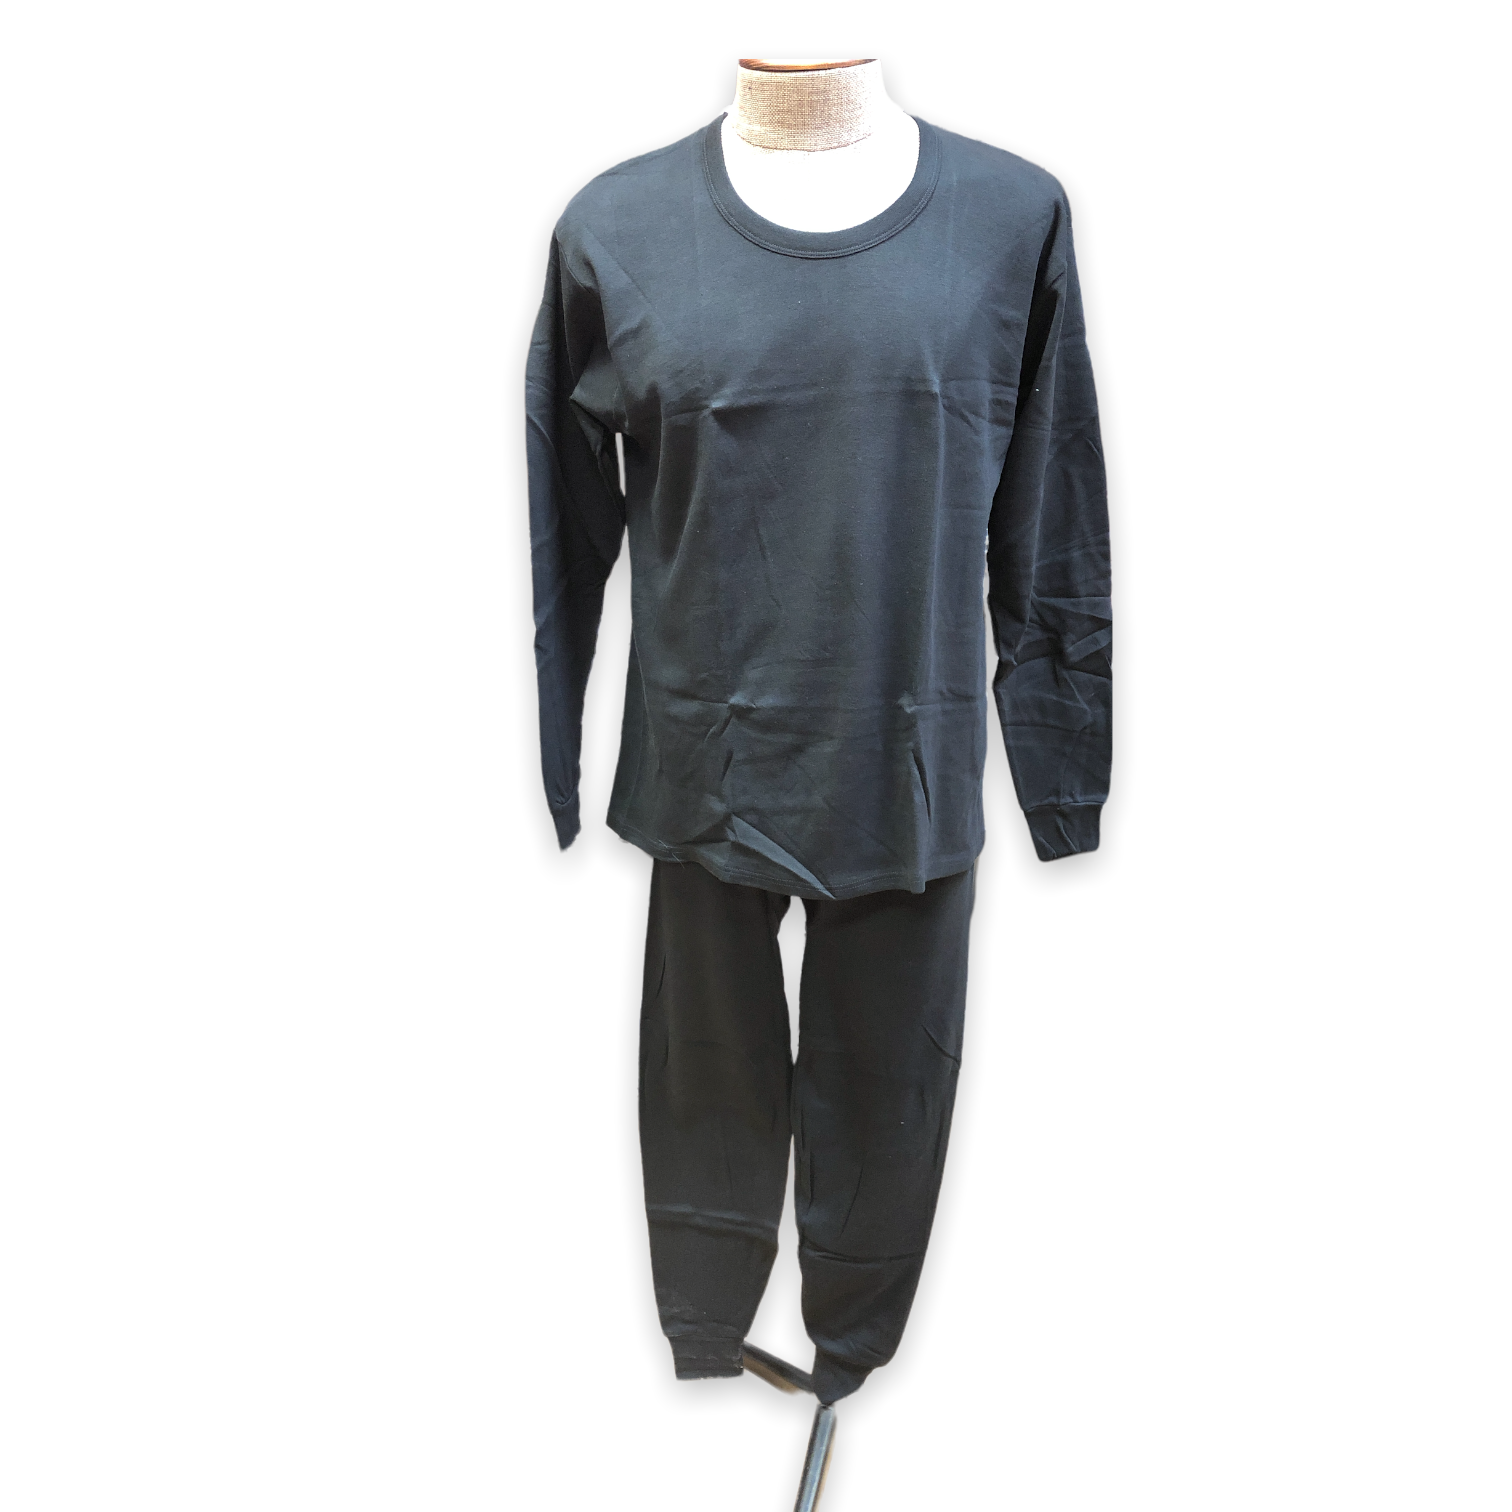 BULK BUY - Men's Two Piece Thermal Long Johns Set (Gift Packaged) (6-Pack)